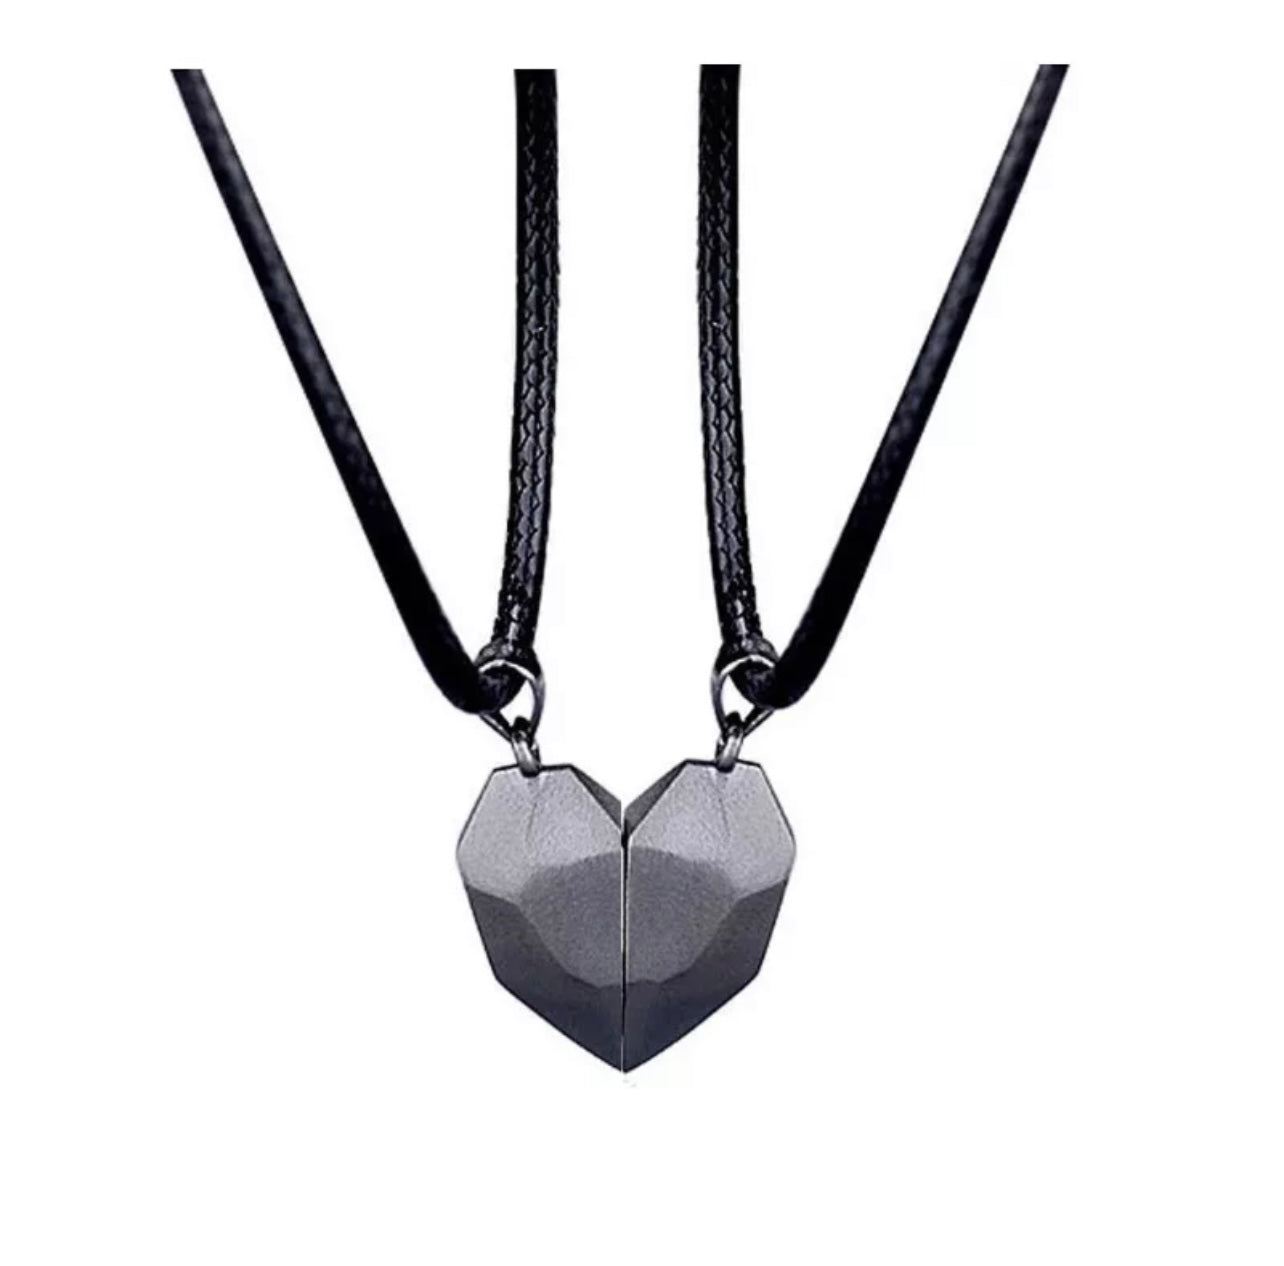 Heart Couples Magnet Necklaces For Him and Her – Nova & D